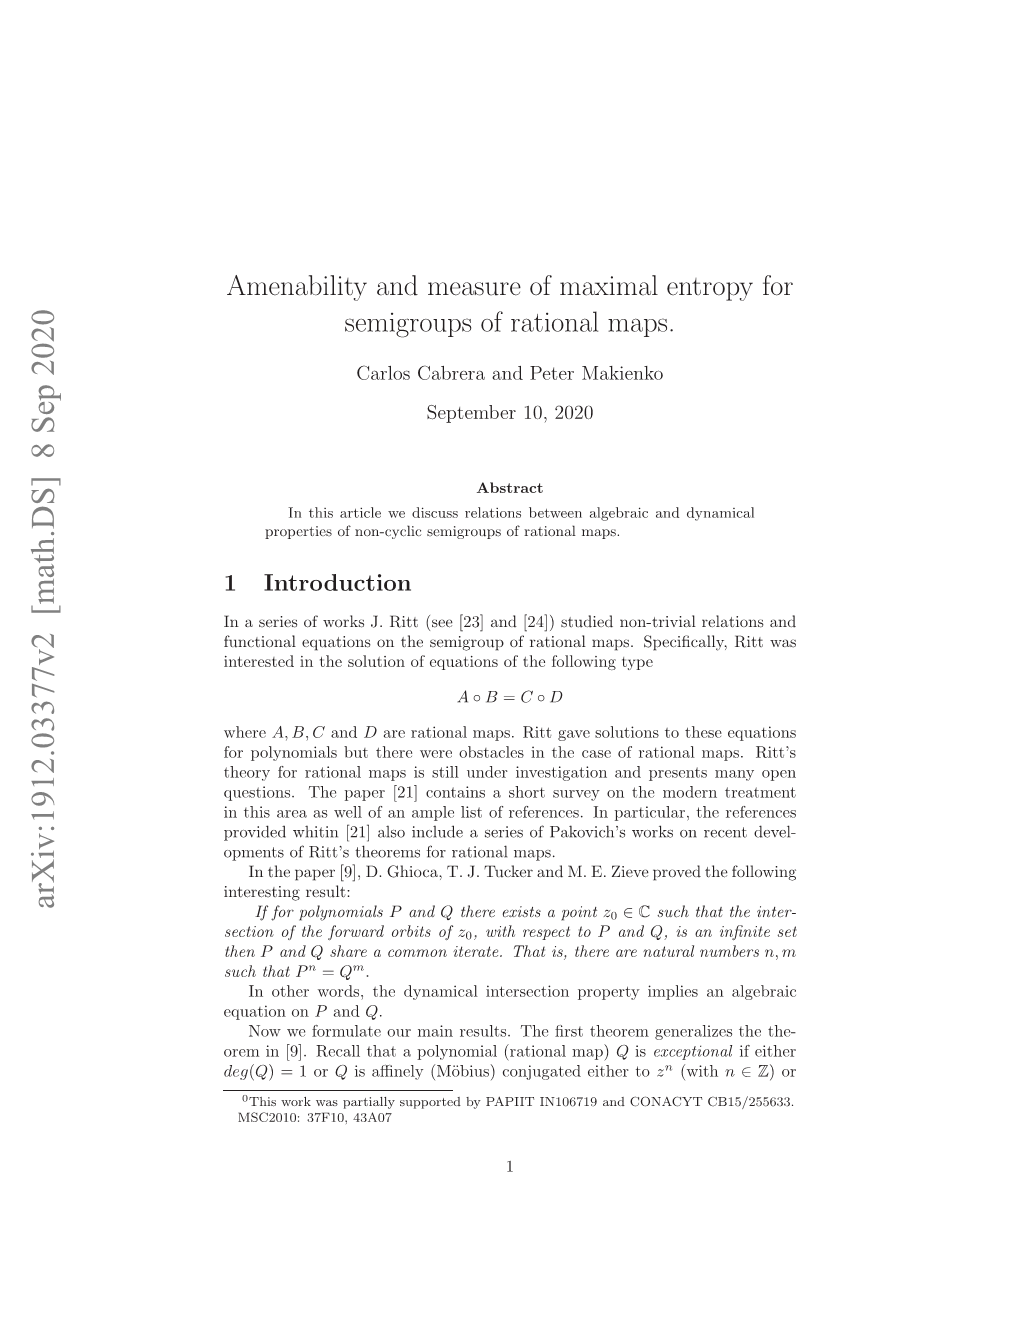 Amenability and Measure of Maximal Entropy for Semigroups of Rational